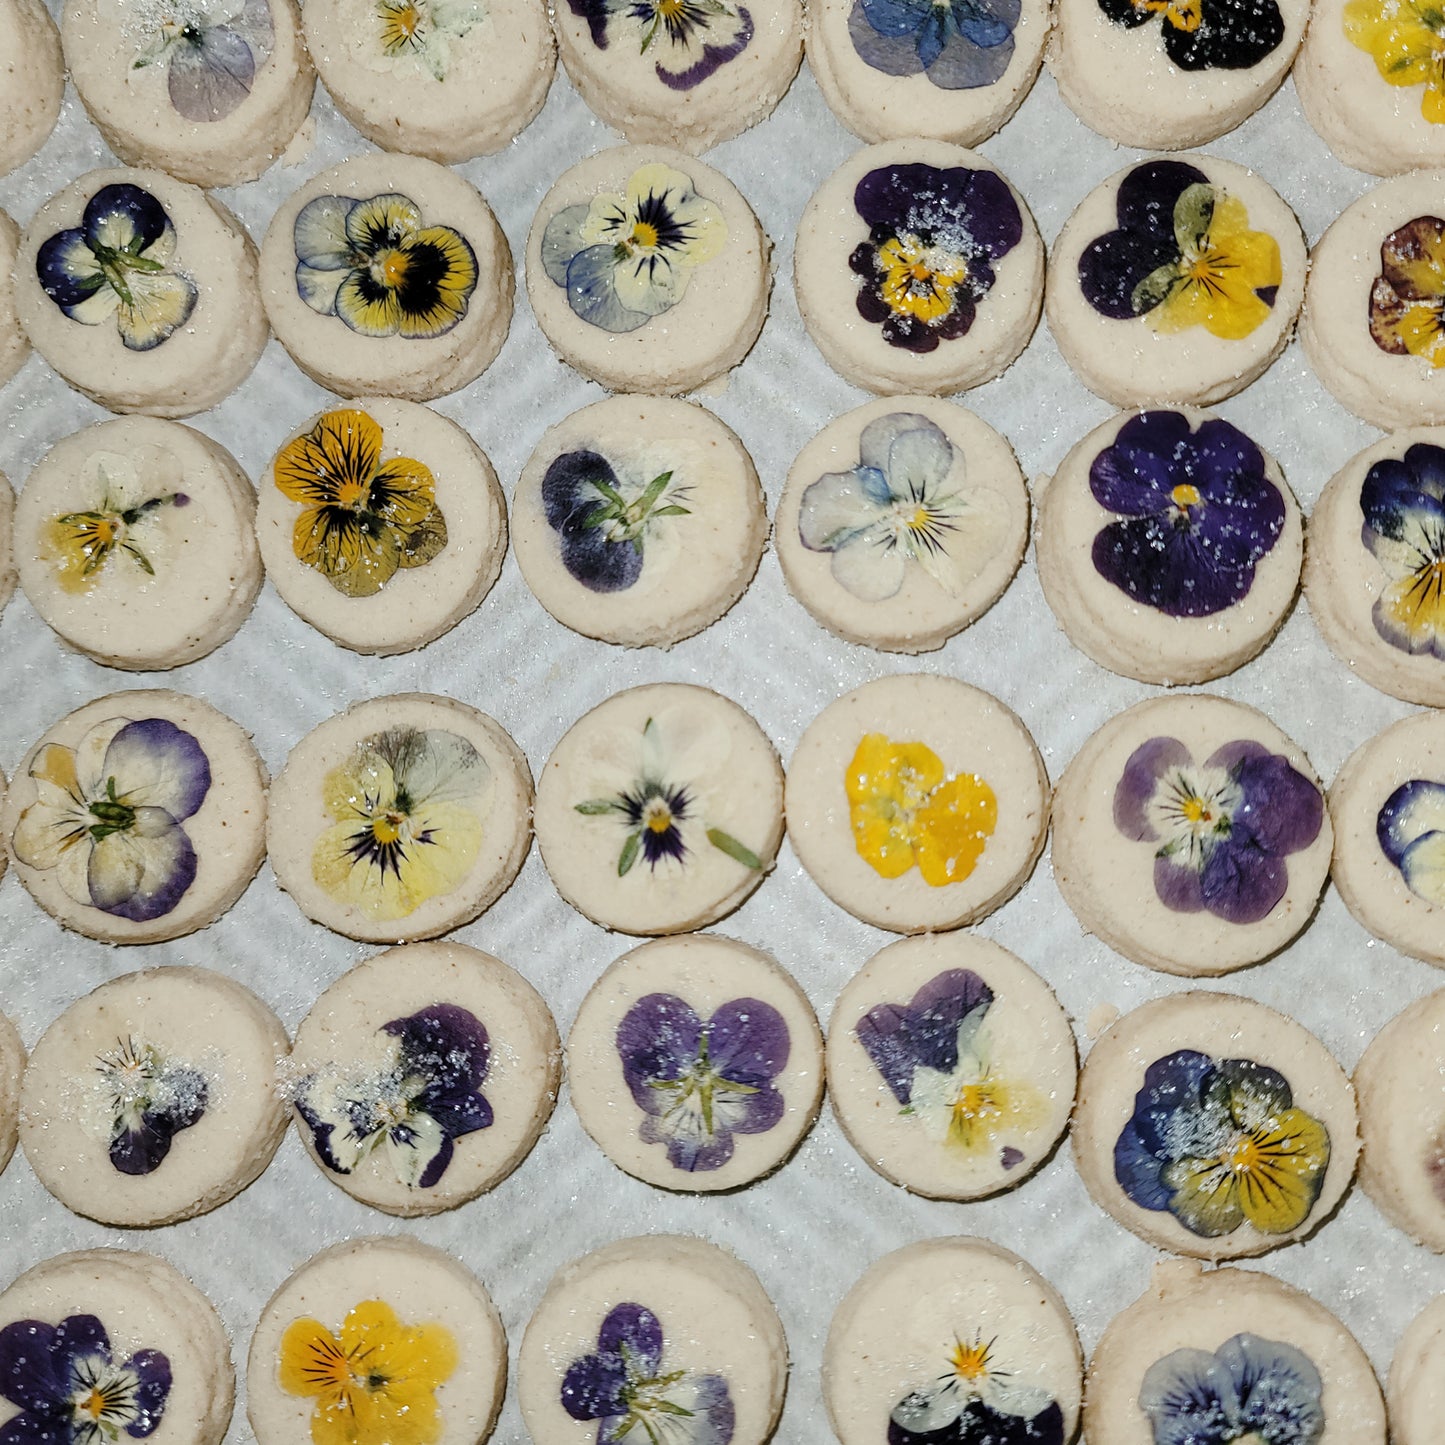 Edible Place Card Cookies – The Dainty Plum, LLC